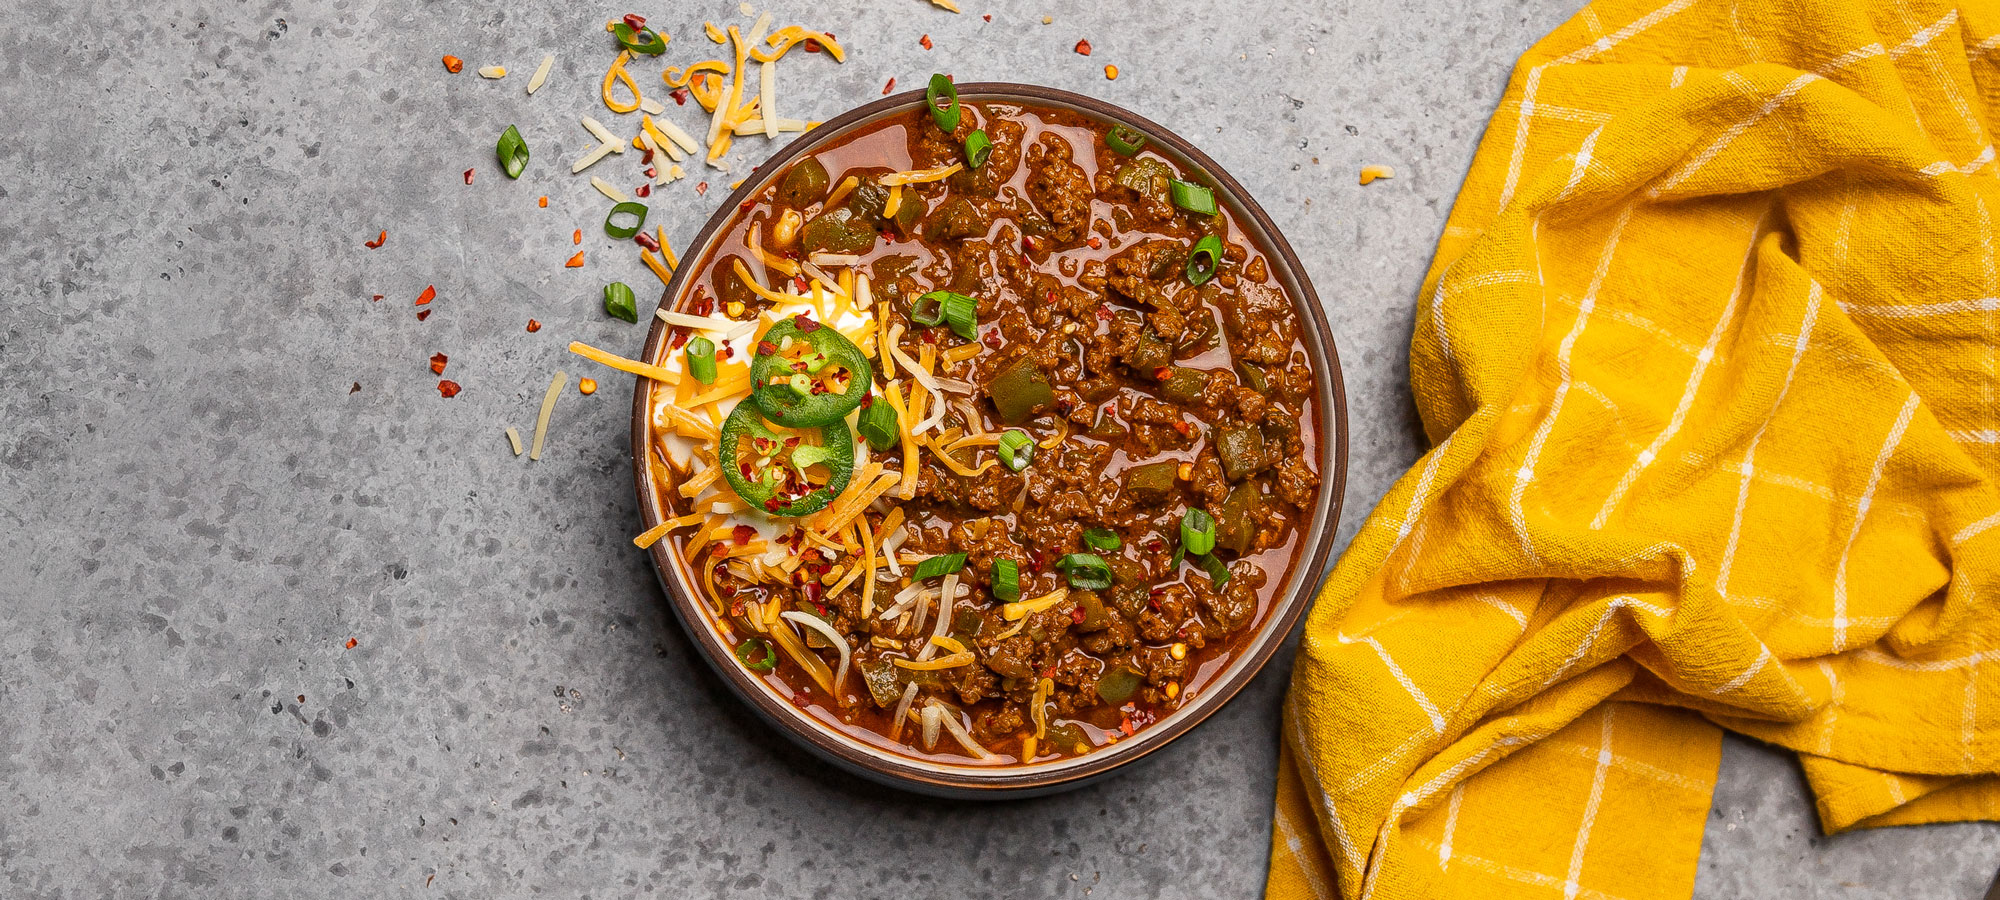 Keto chili with beef and spicy peppers